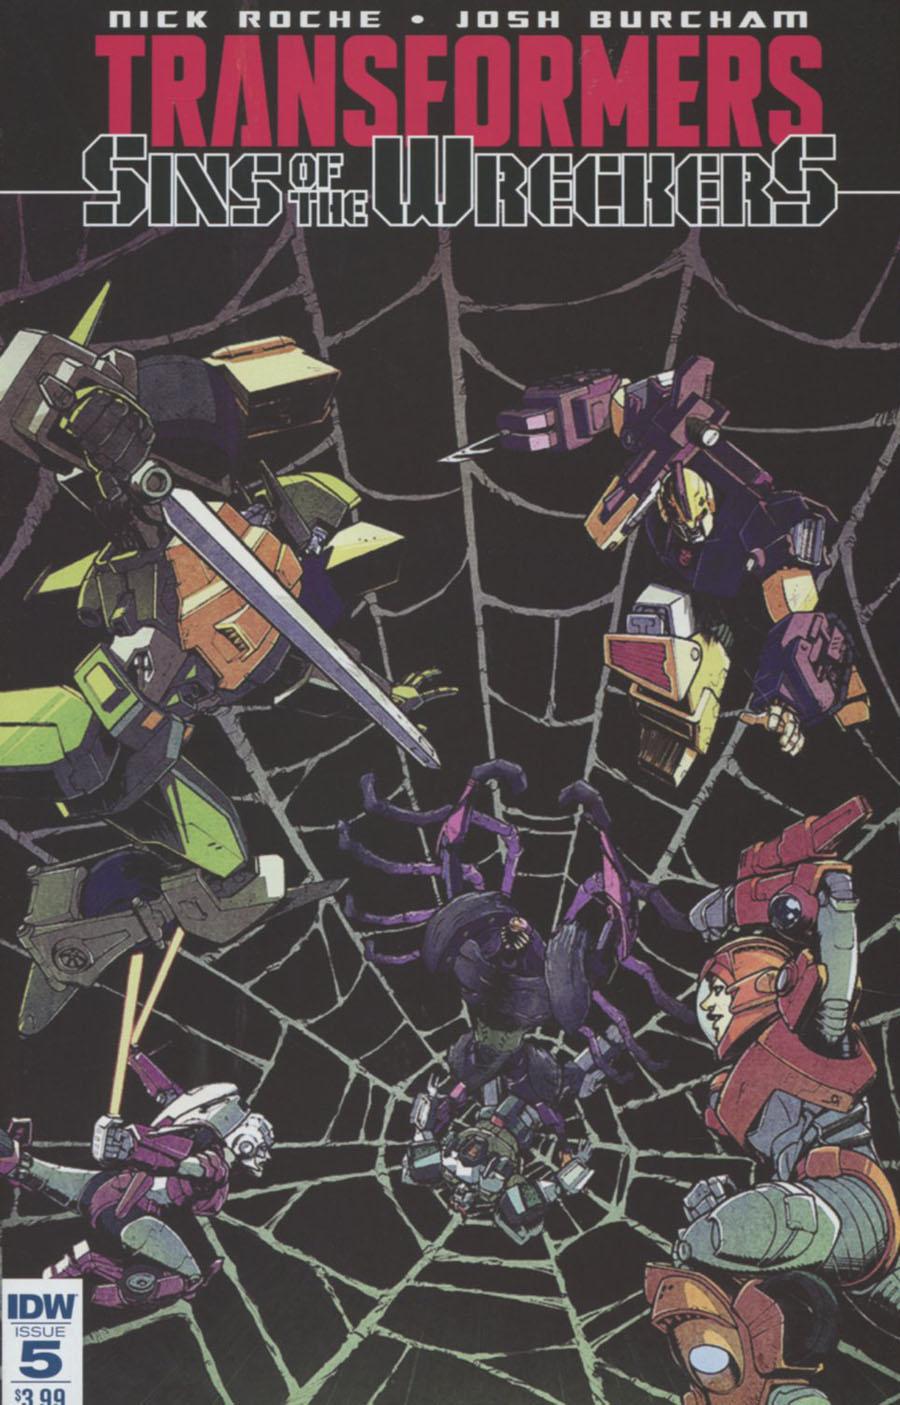 Transformers Sins Of The Wreckers Vol. 1 #5